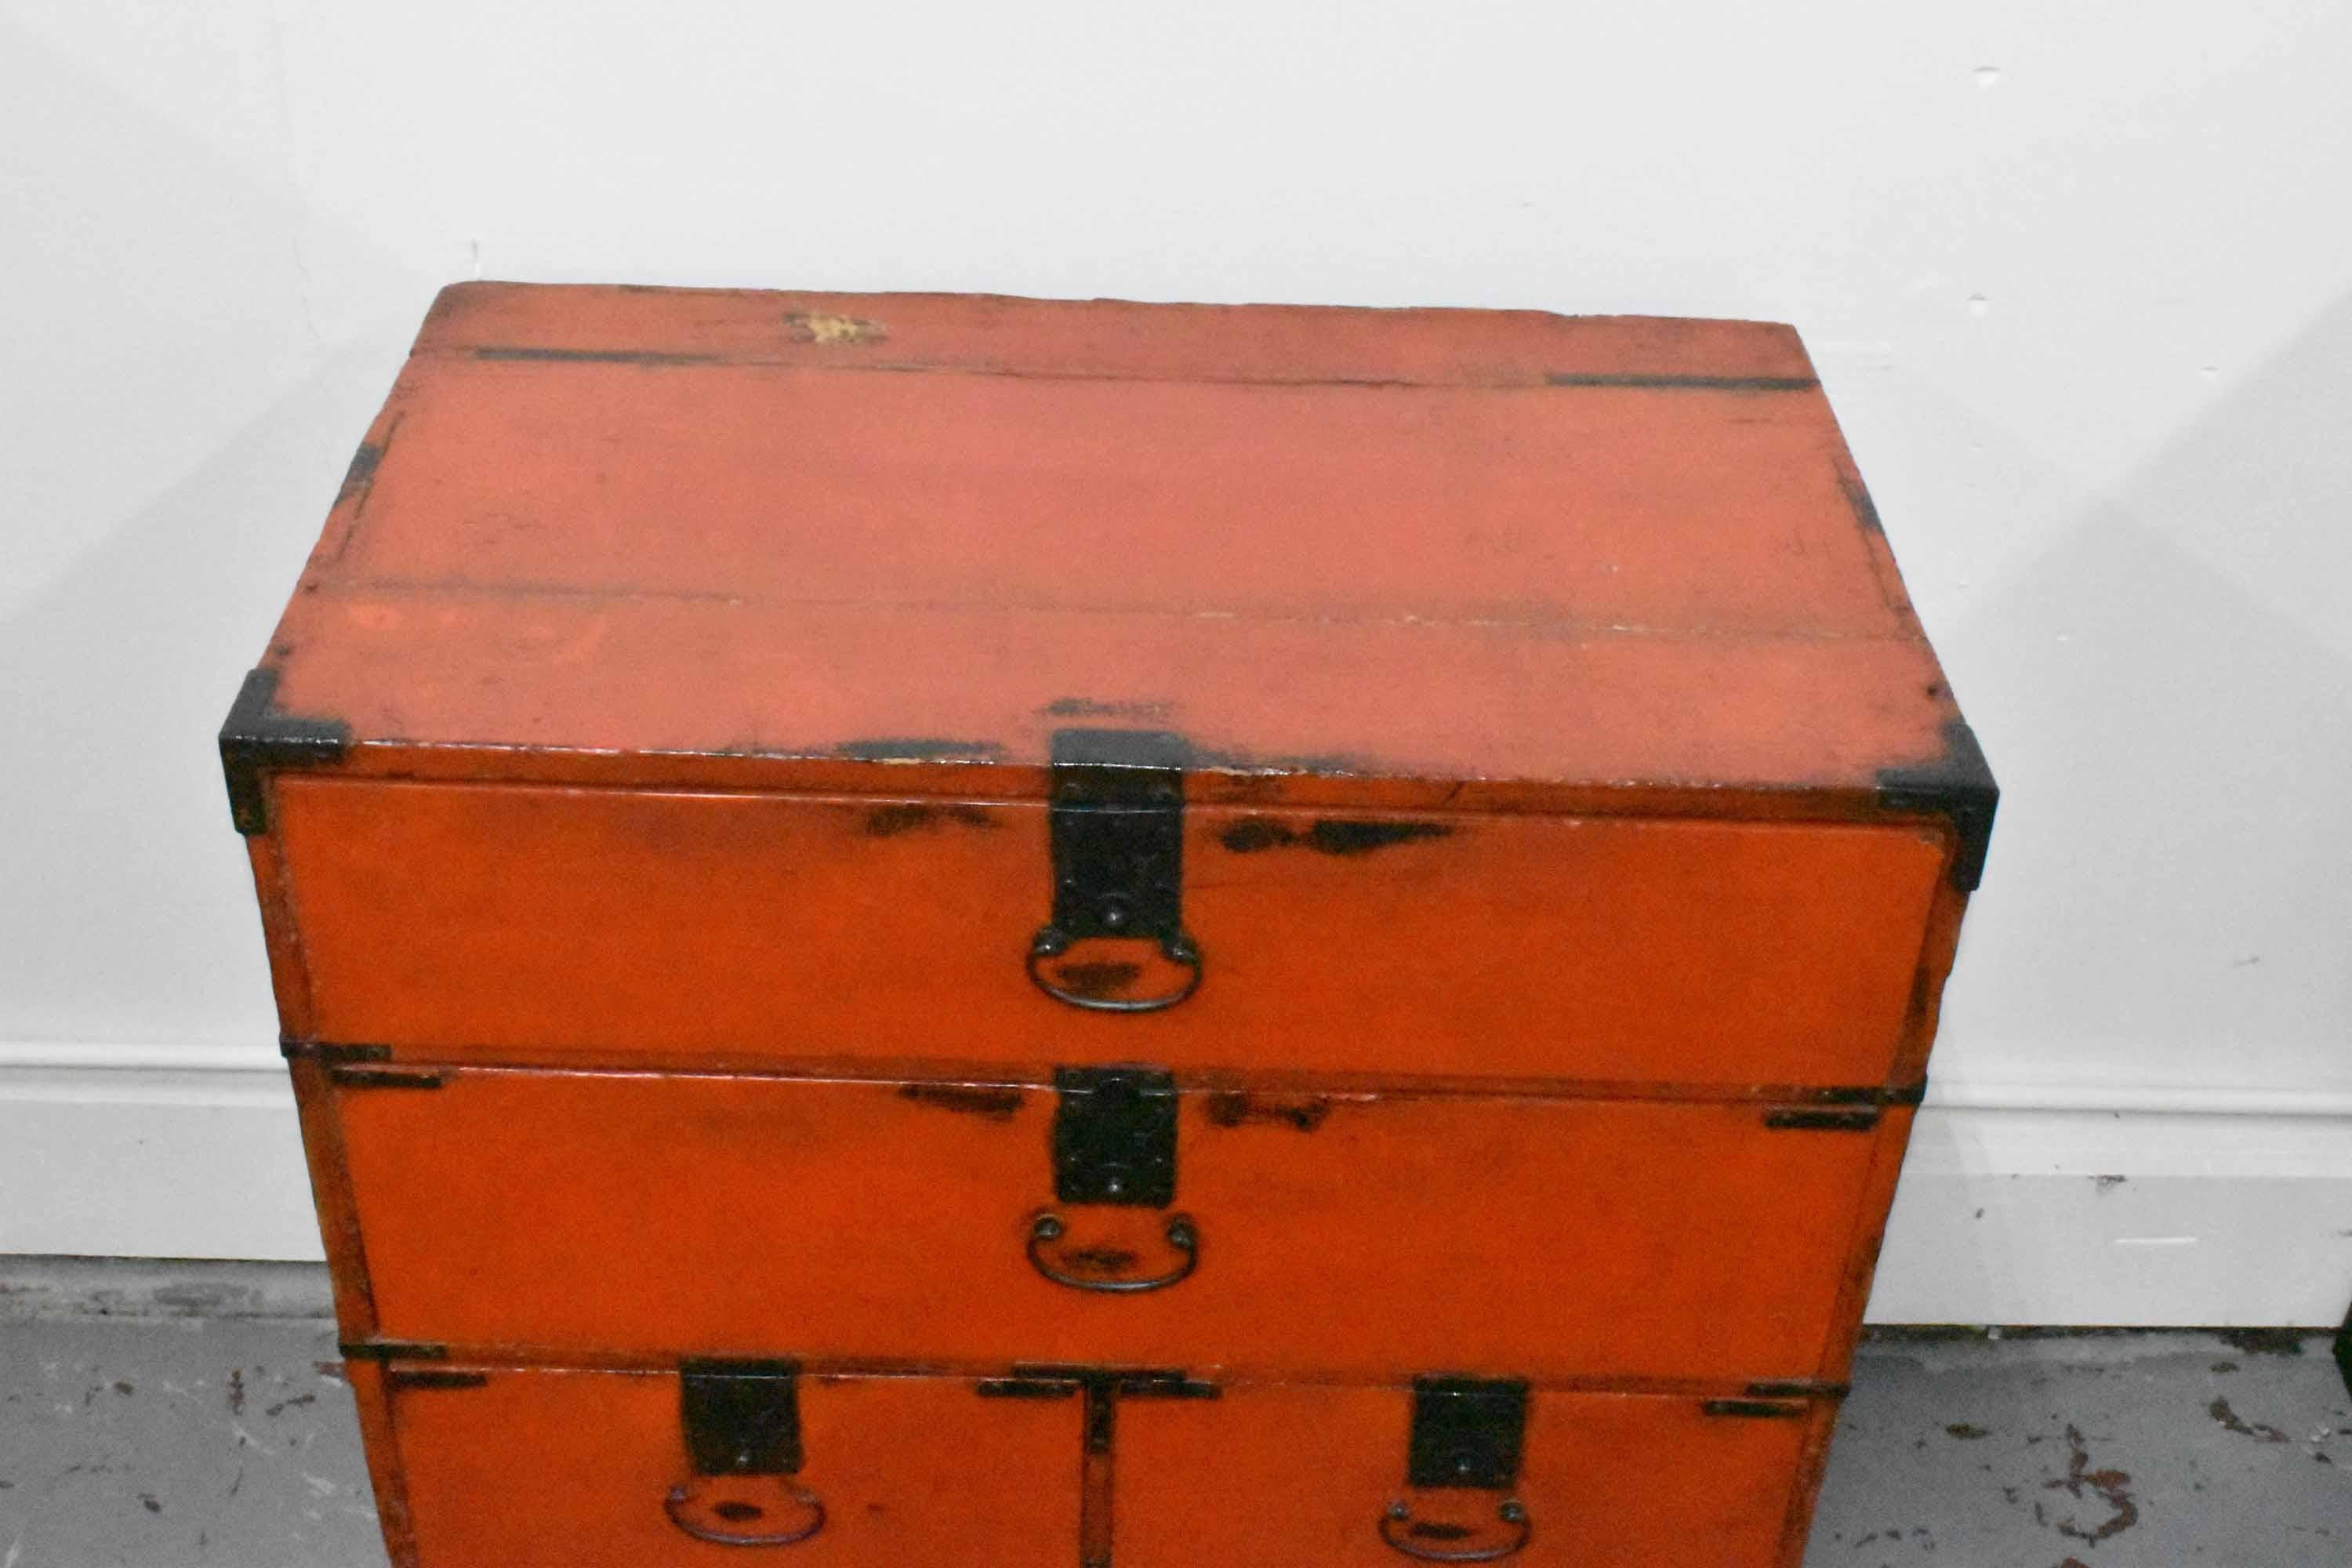 A mid-19th century Asian Tansu chest in burnt-orange lacquer, with iron handles and locks, and seven small drawers. Possibly Japanese or Korean. Nice small size, good for side stand or end table.